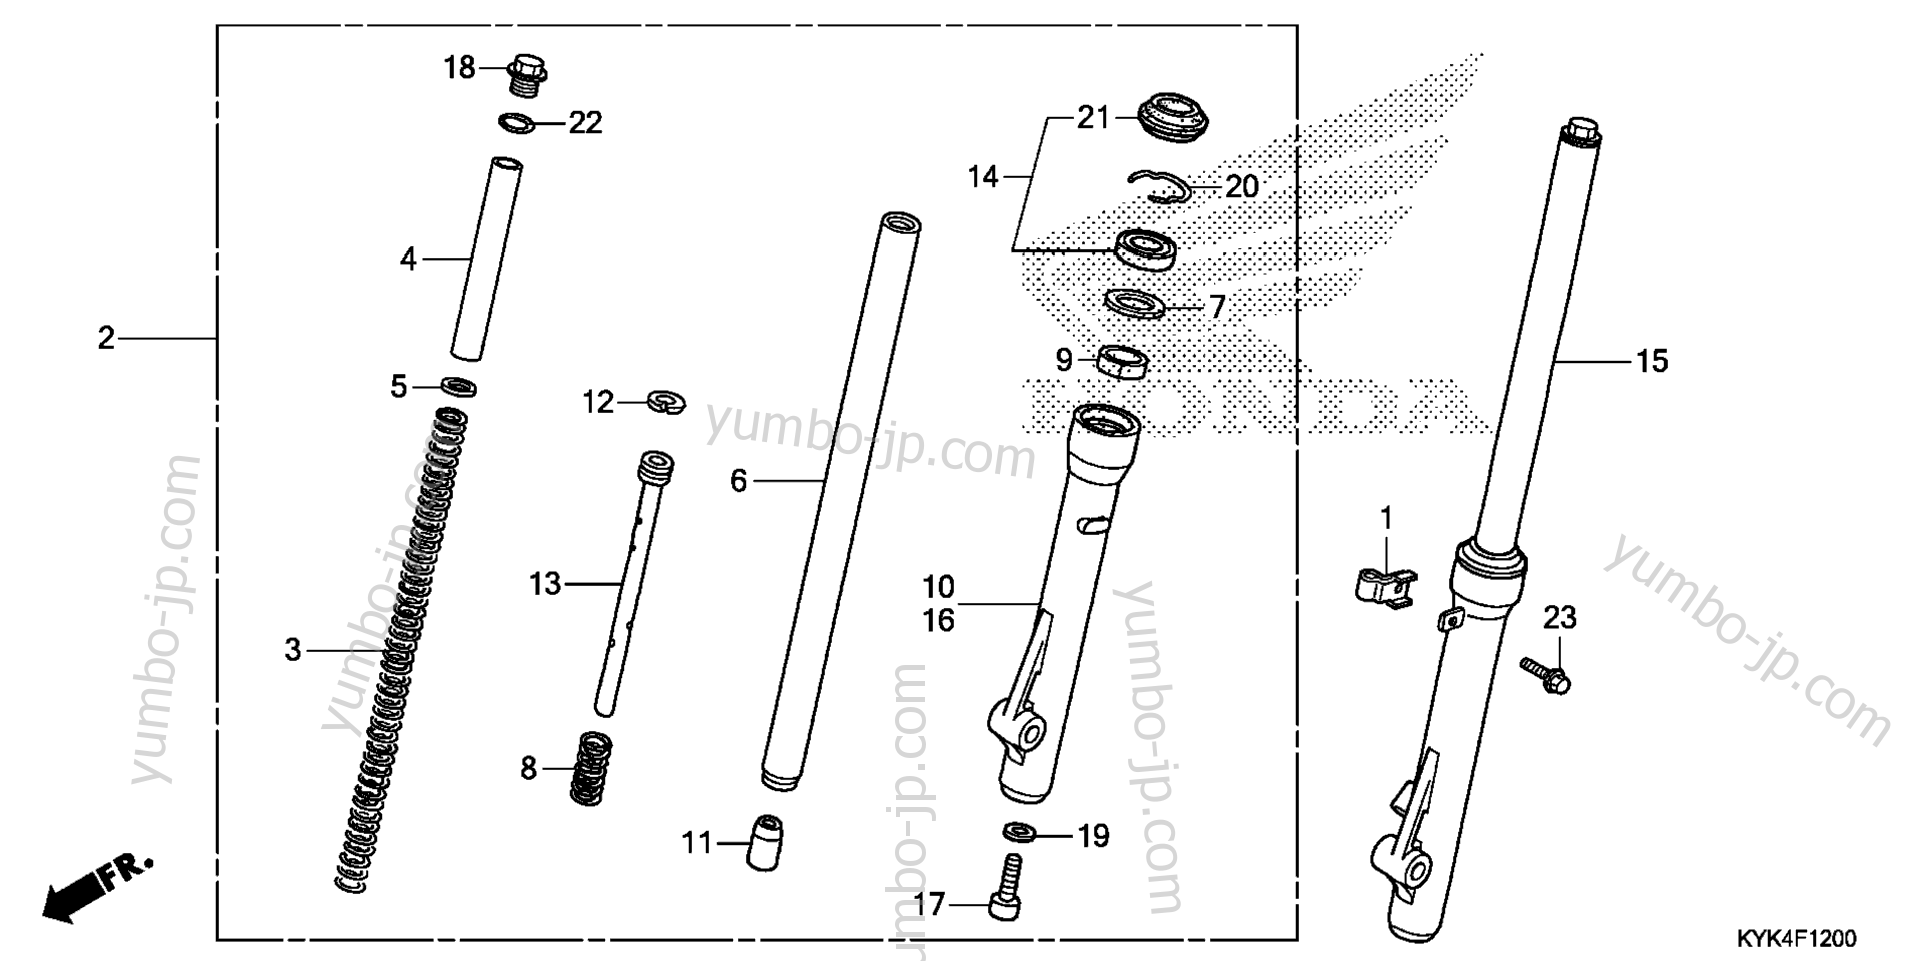 FRONT FORK for motorcycles HONDA CRF110F AC 2015 year